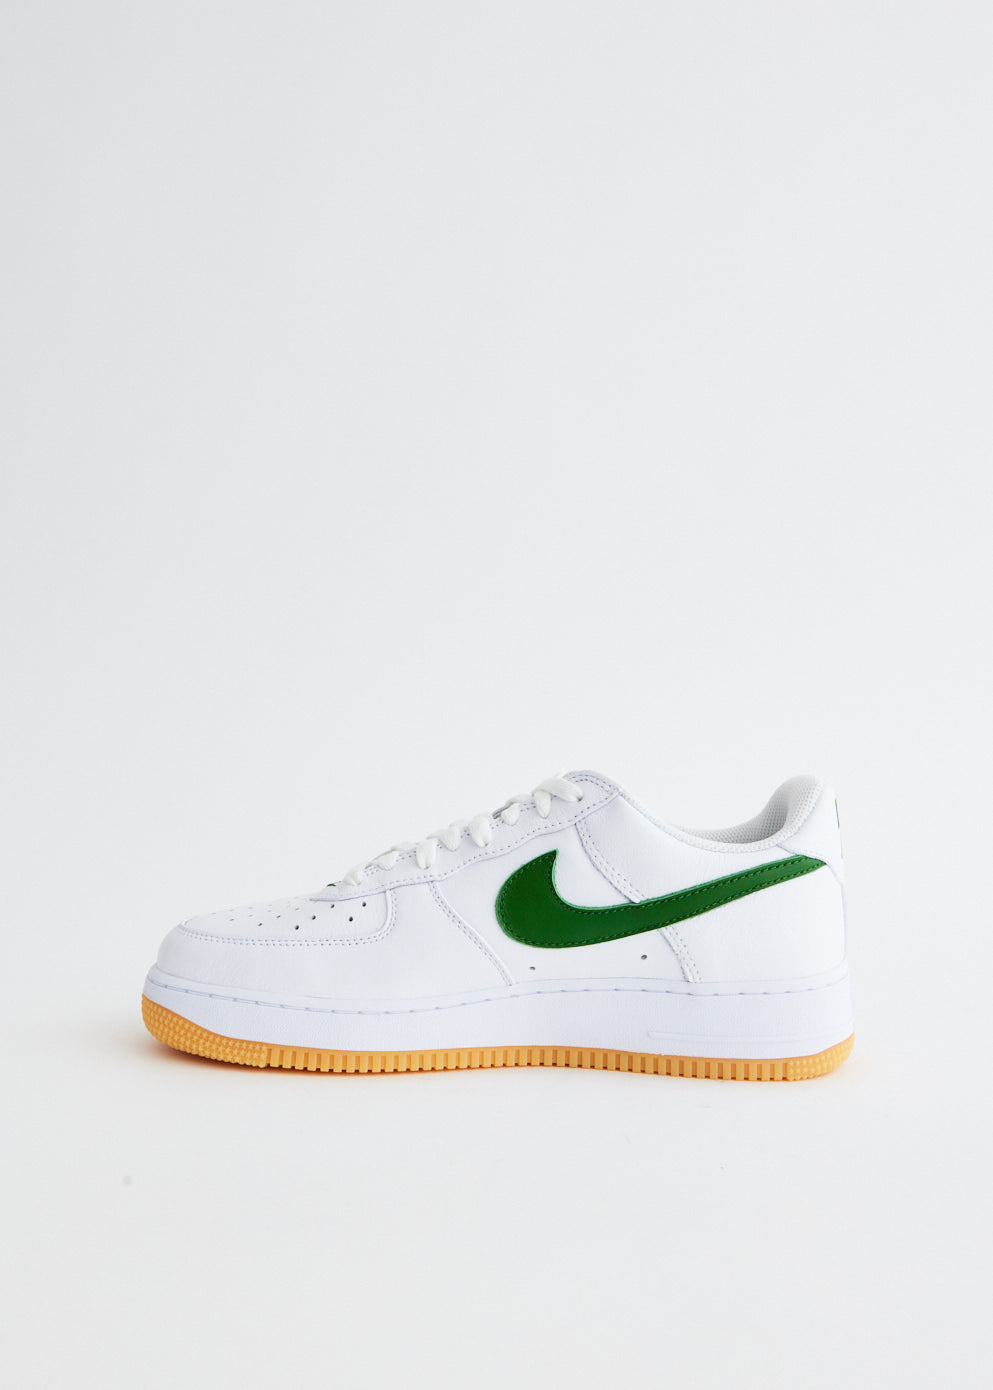 Air Force 1 Low Retro 'Forest Green' Sneakers